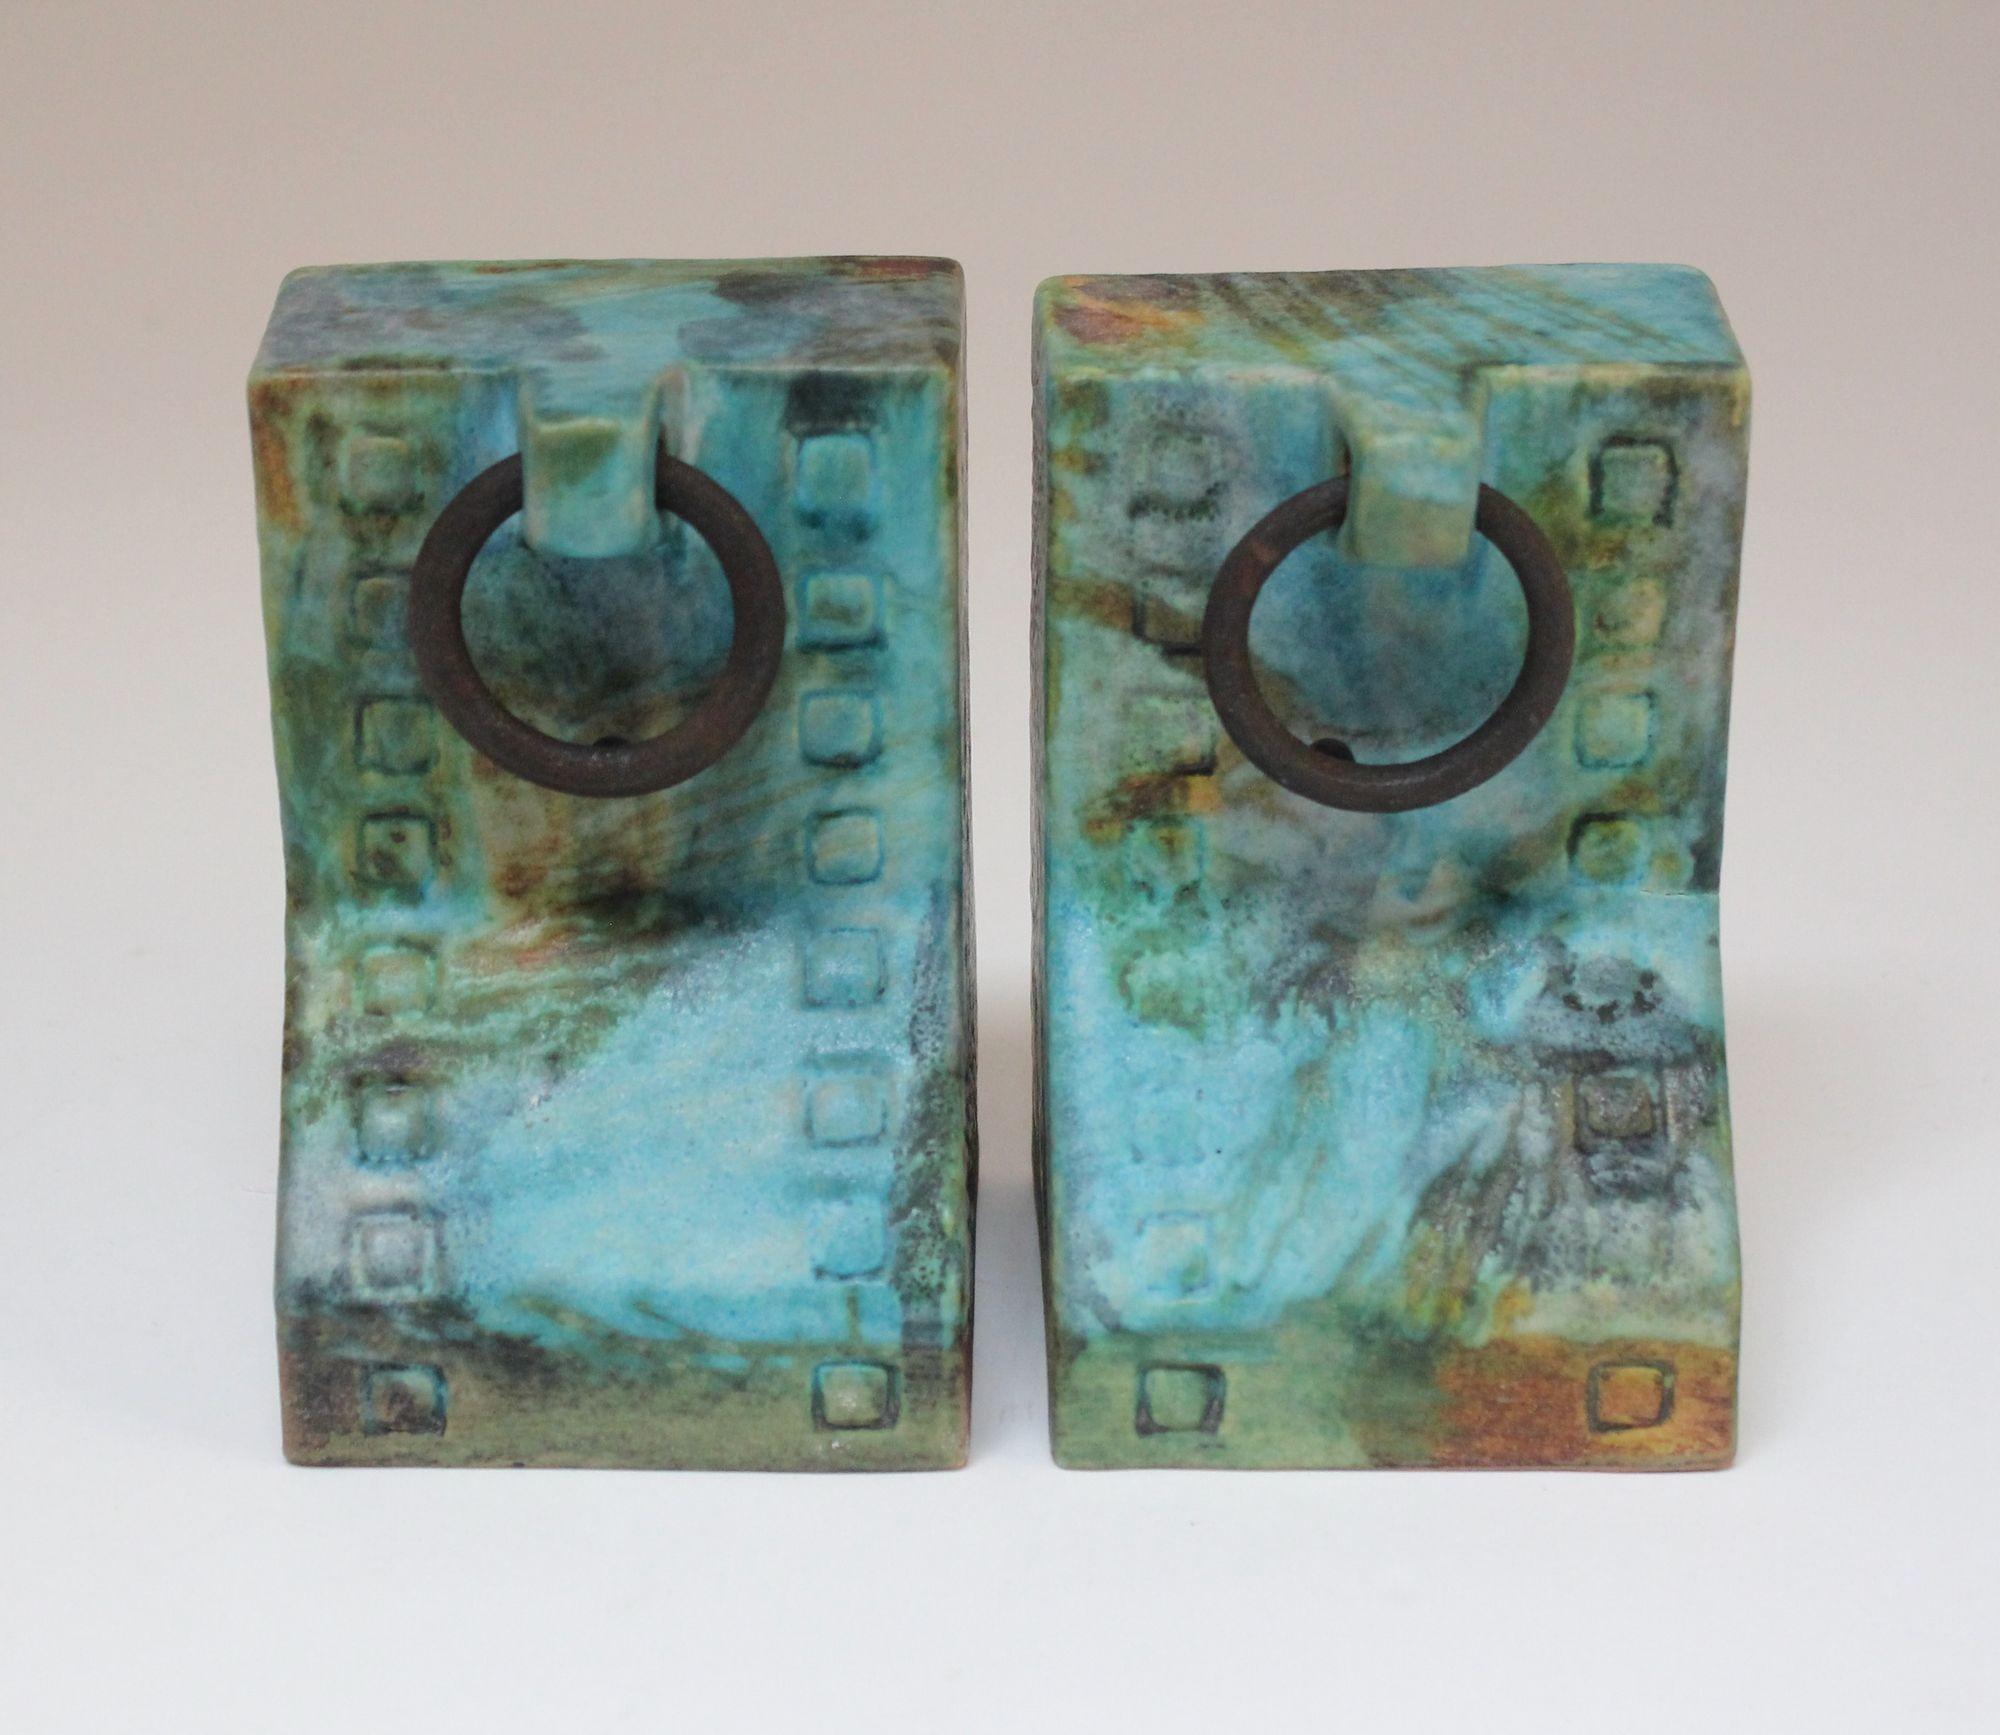 Ceramic bookends with decorative iron rings from the 